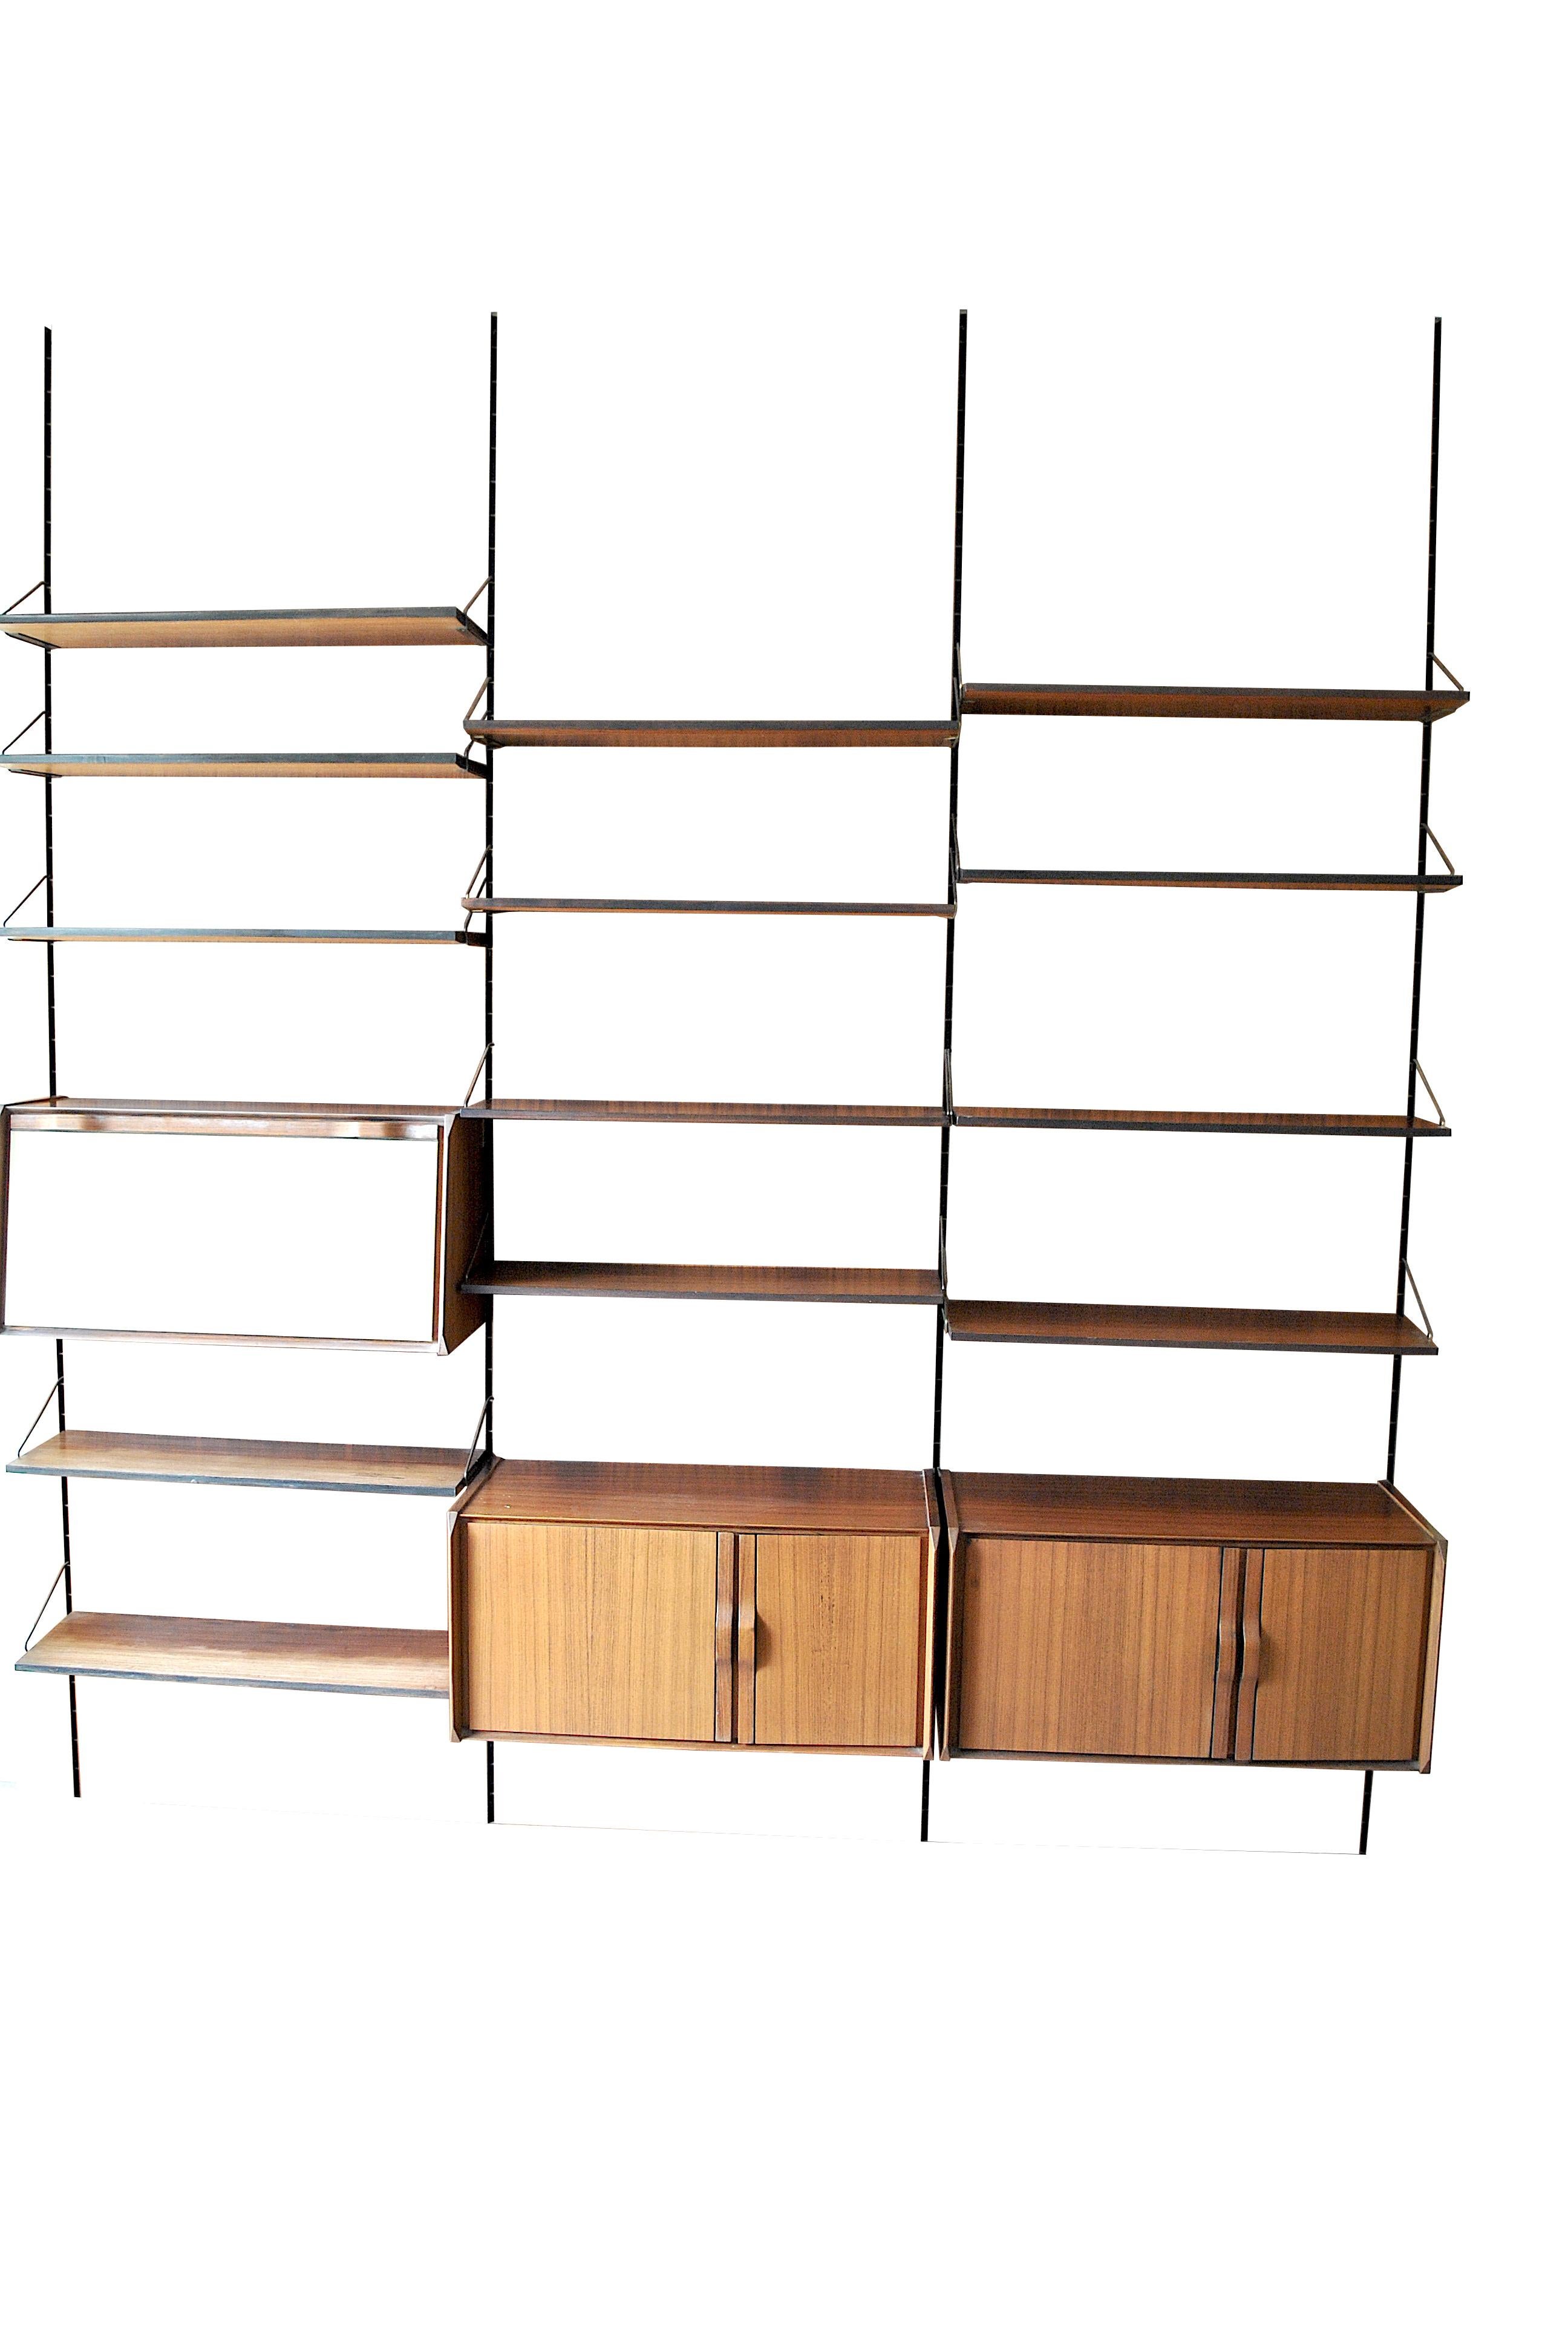 Italian midcentury bookcase by Gianfranco Frattini for La Permanente Mobili Cantù, Italy. The bookcase is composed of three modules with three containers and 13 shelves walnut
The bookcase can be mounted in two ways with or without wooden panels as